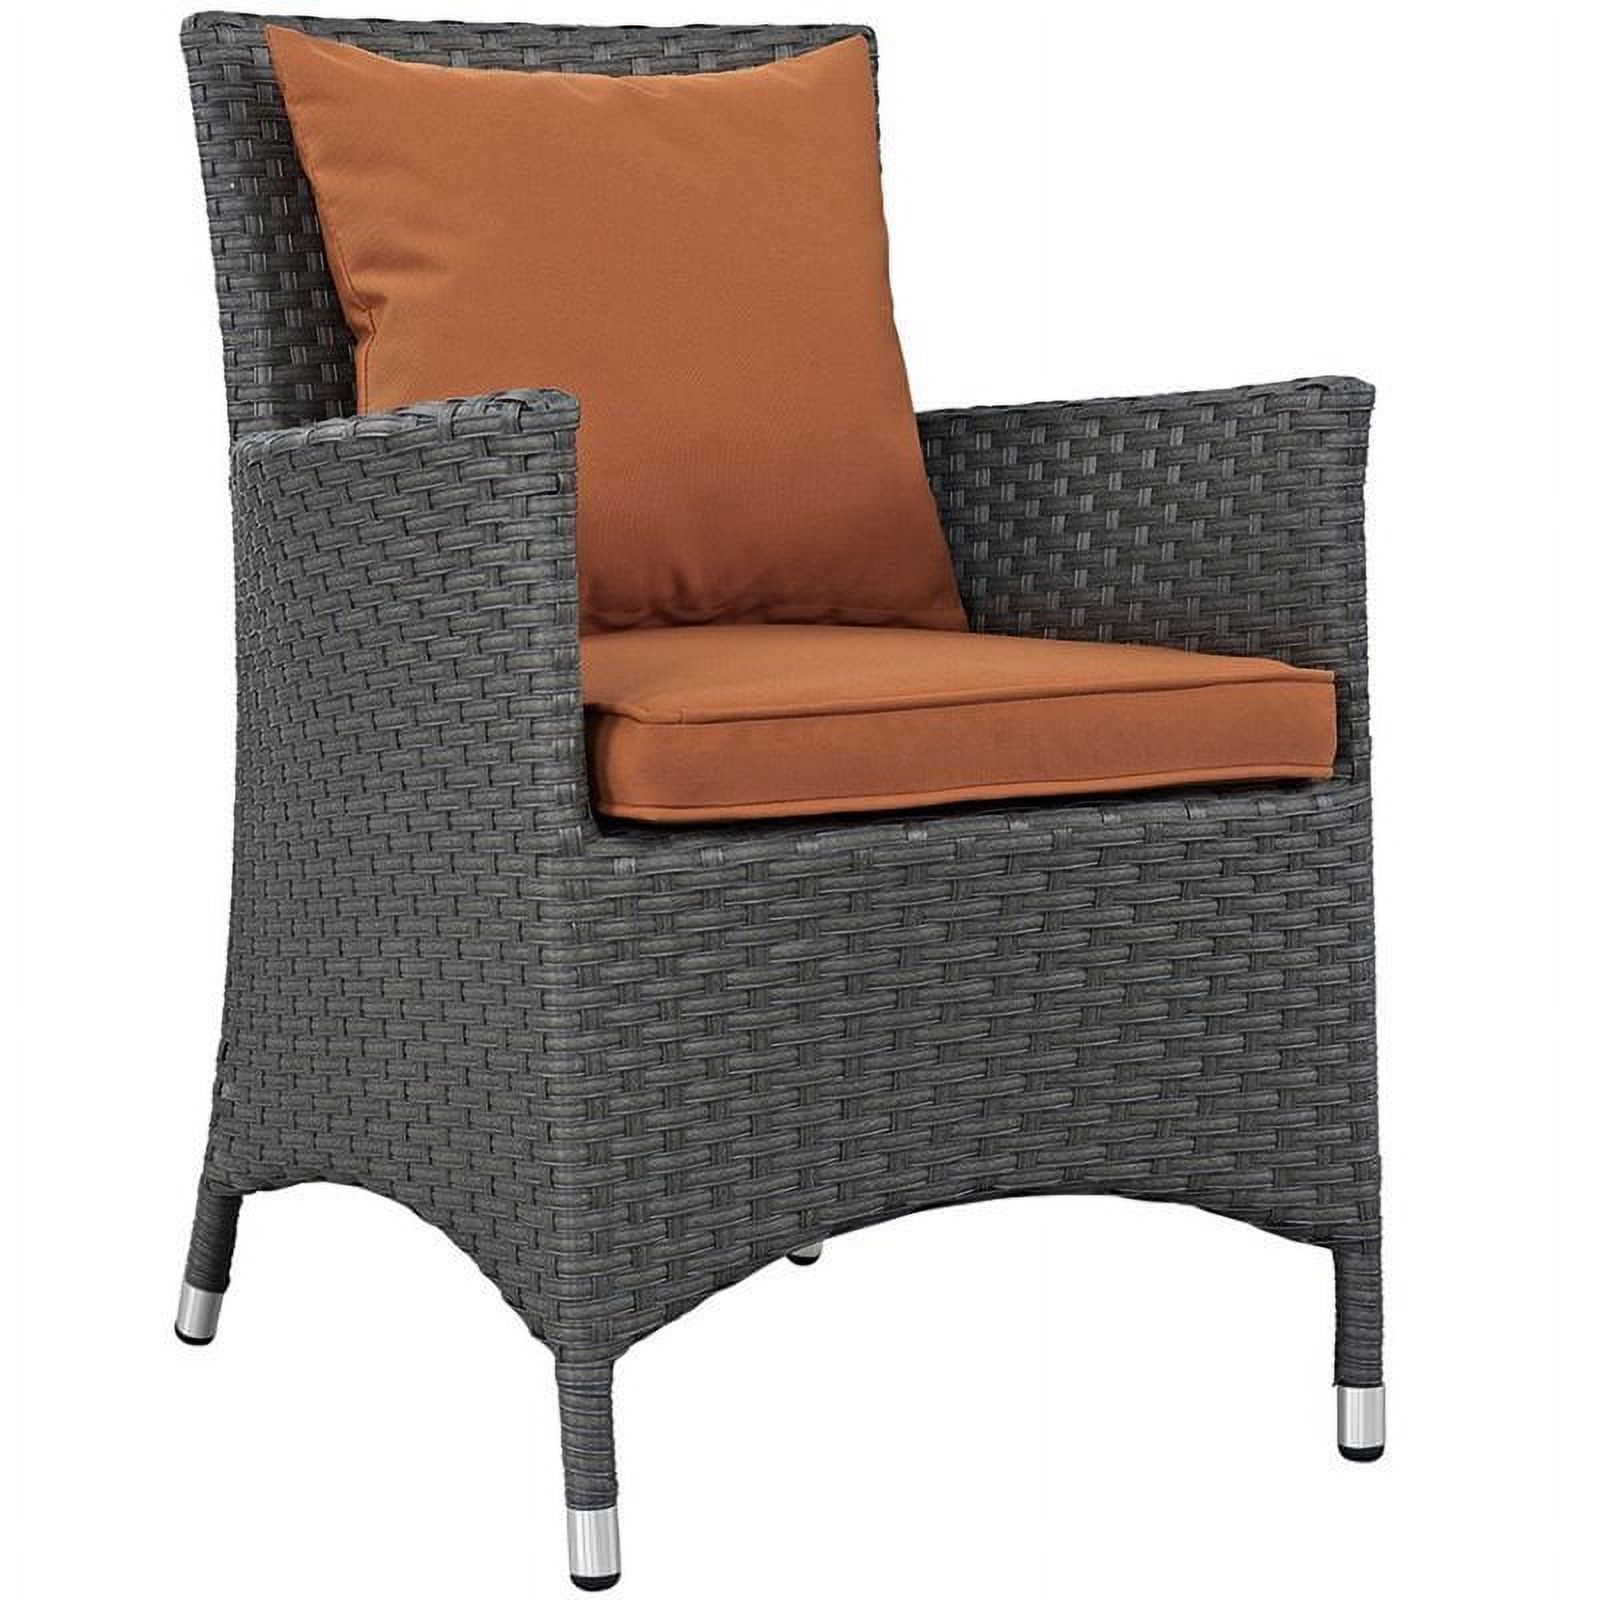 Hawthorne Collection Patio Dining Arm Chair in Canvas Tuscan - image 1 of 1